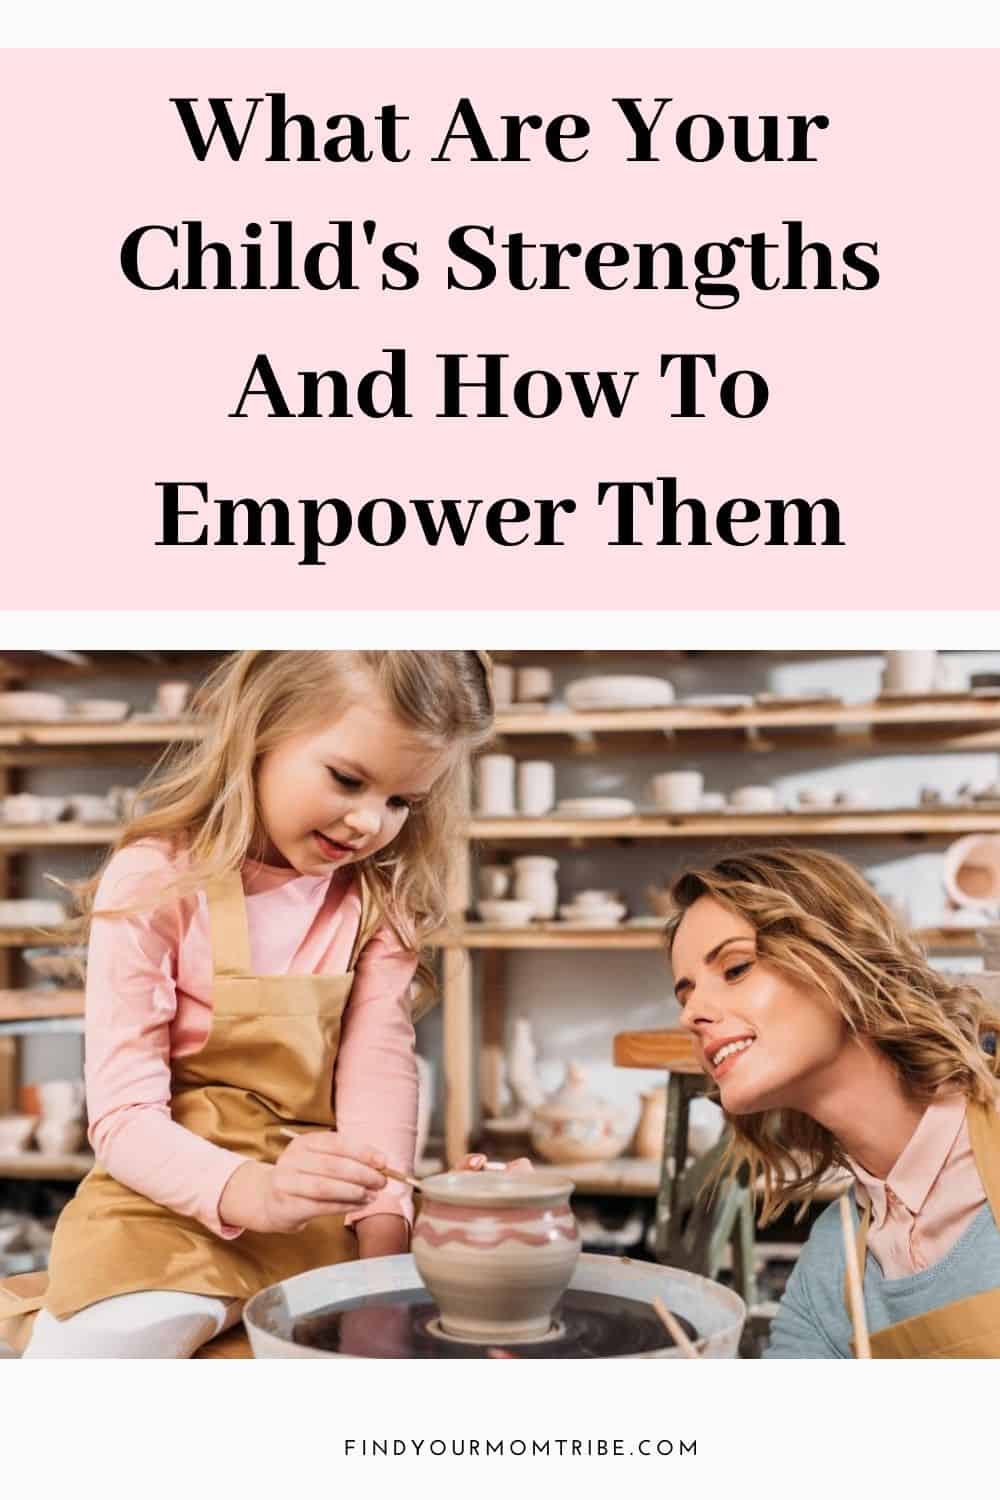 What Are Your Child's Strengths And How To Empower Them